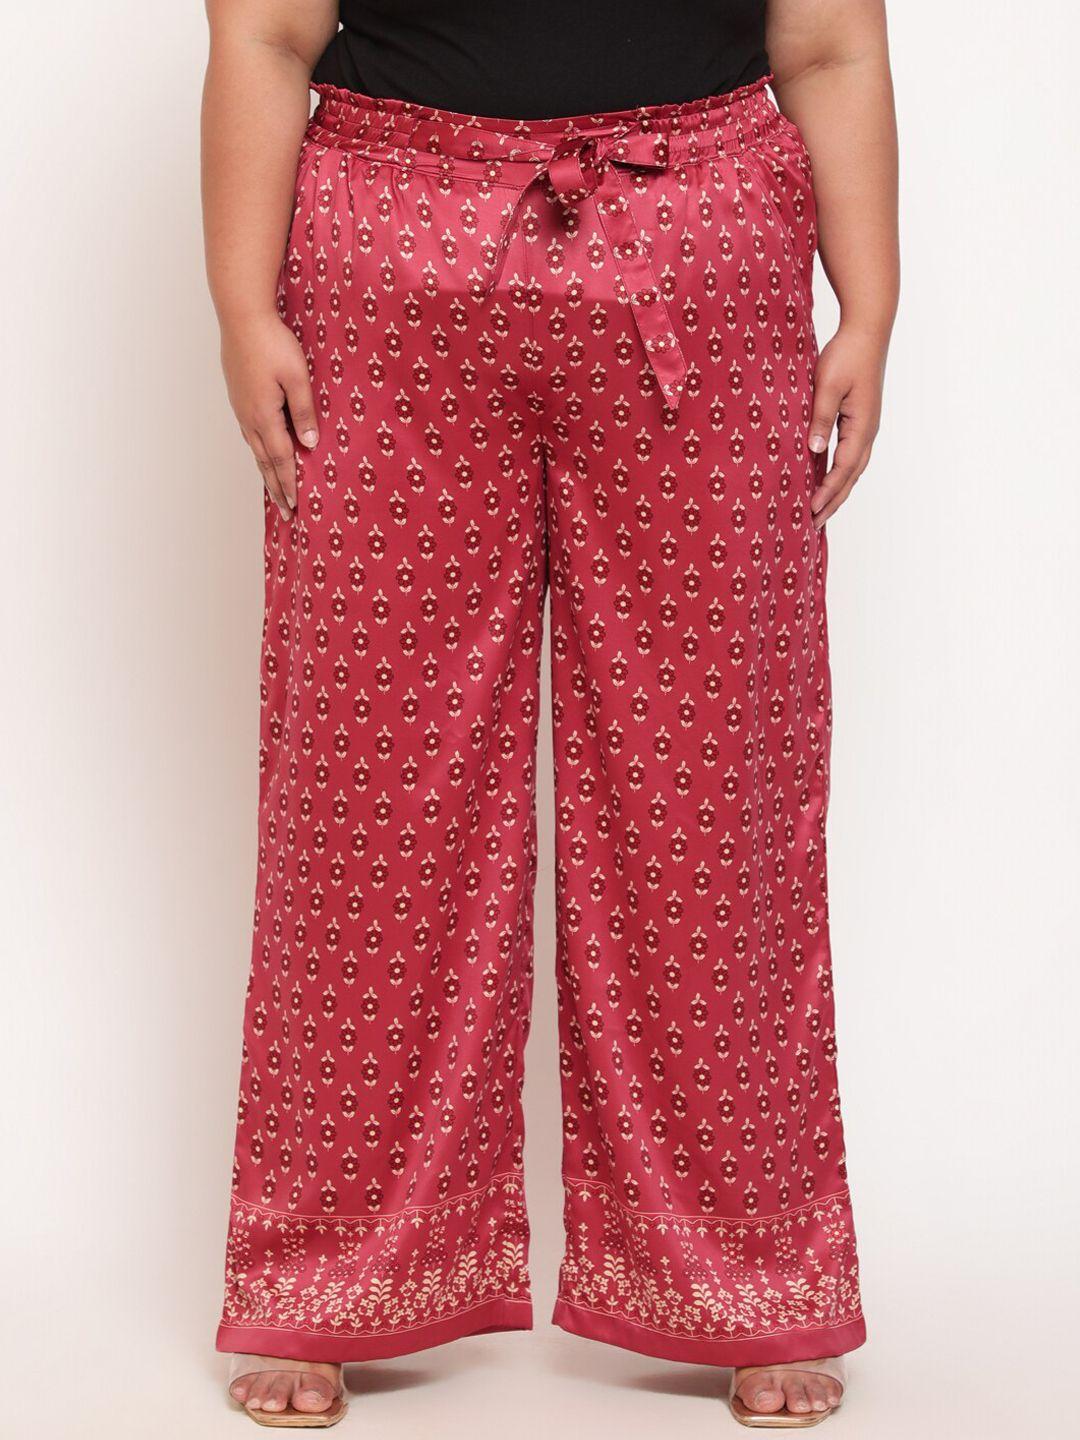 amydus-women-plus-size-red-floral-printed-high-rise-trouser